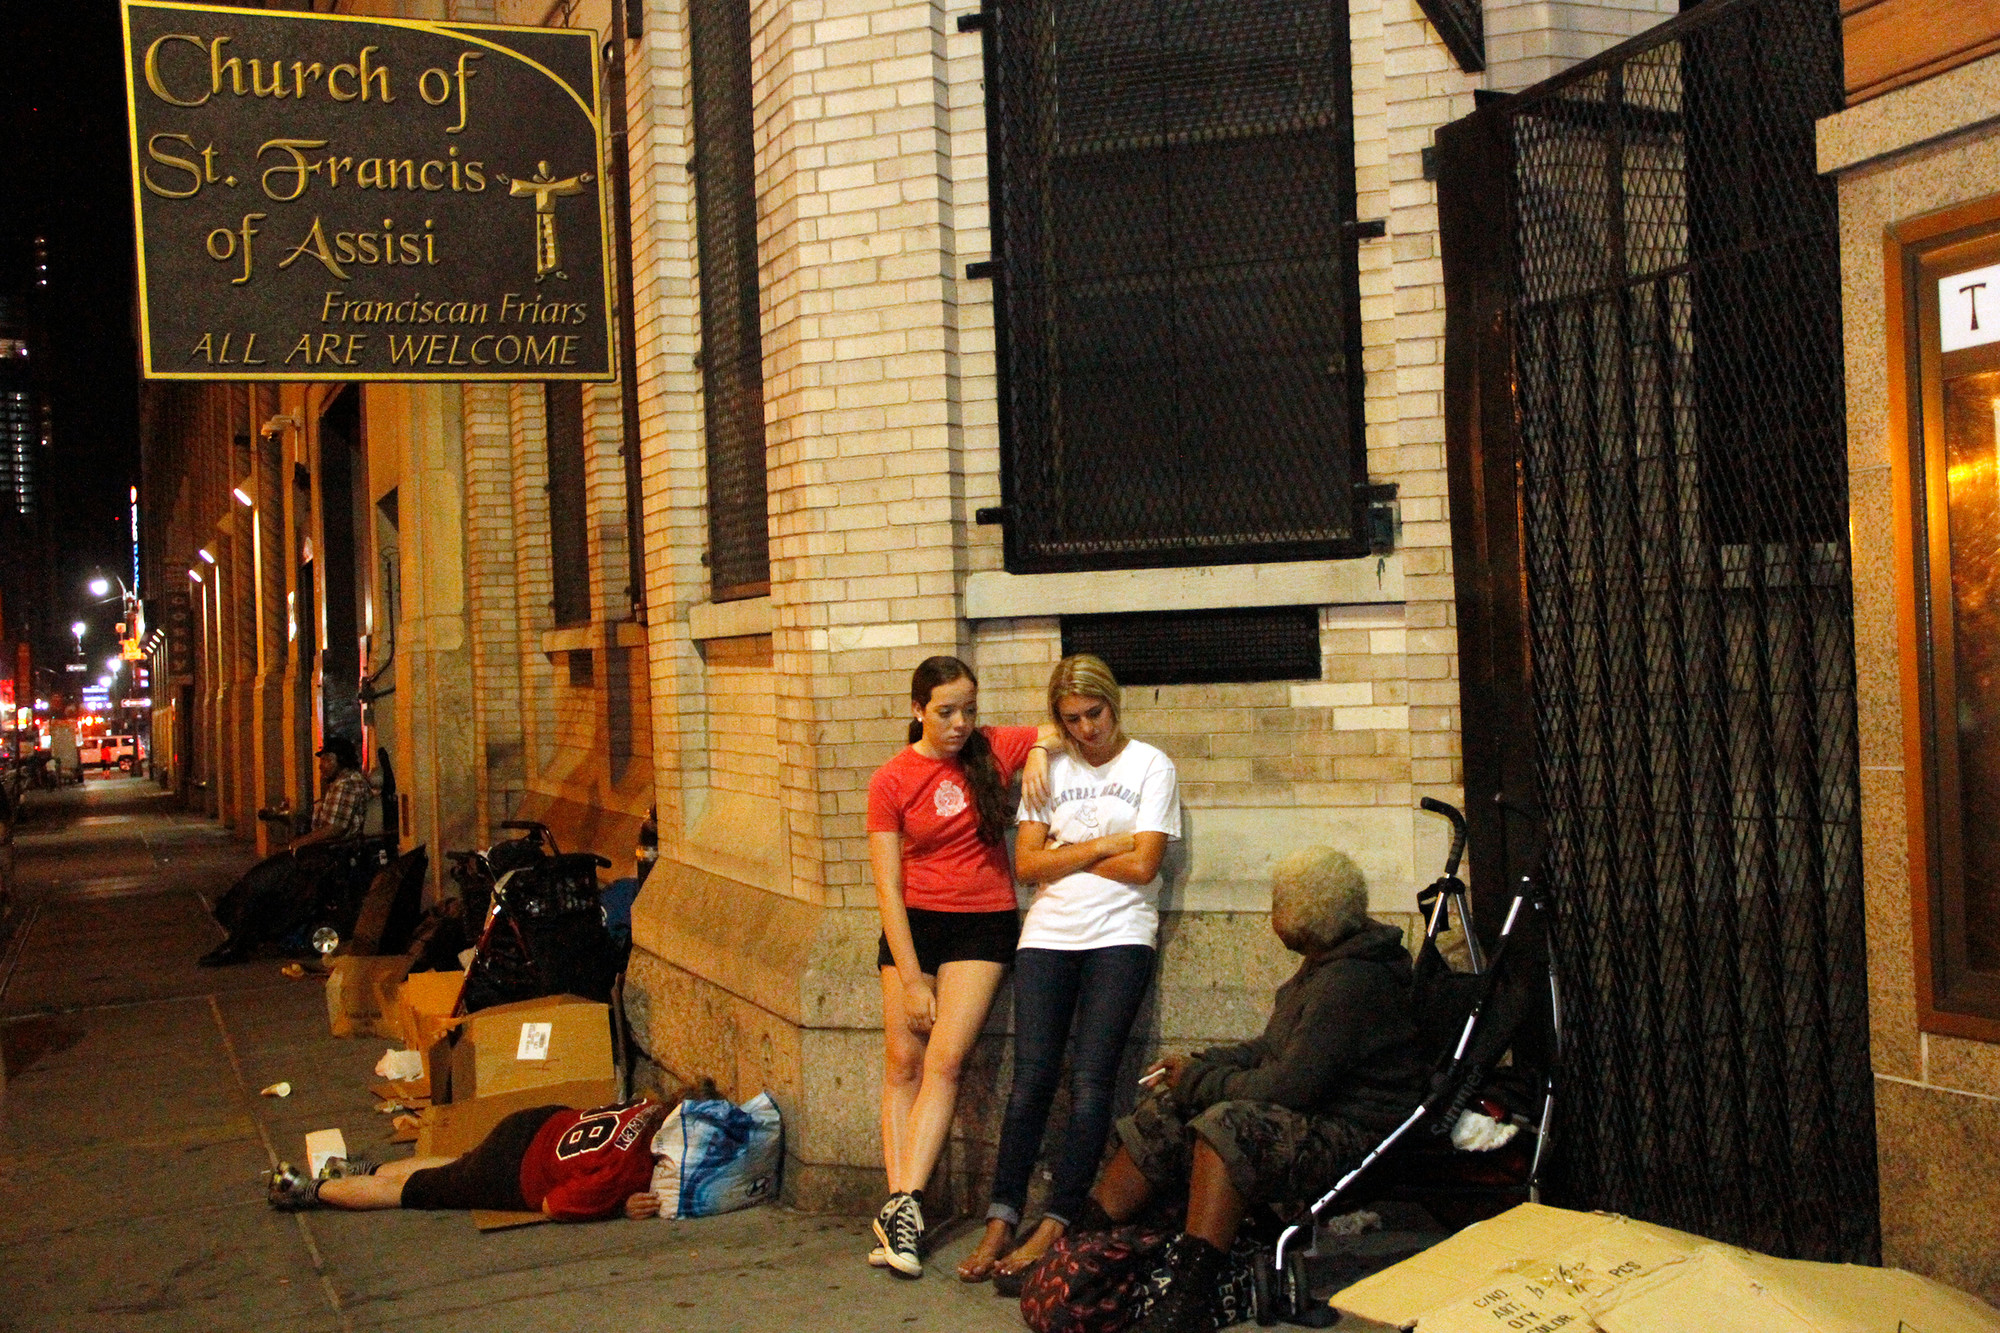 Malvernites Laura Fewer, left, and Sophie Wilson spent time talking with Jean outside the Church of St. Francis of Assisi on 31st St. in Manhattan — the spot that Jean calls home.